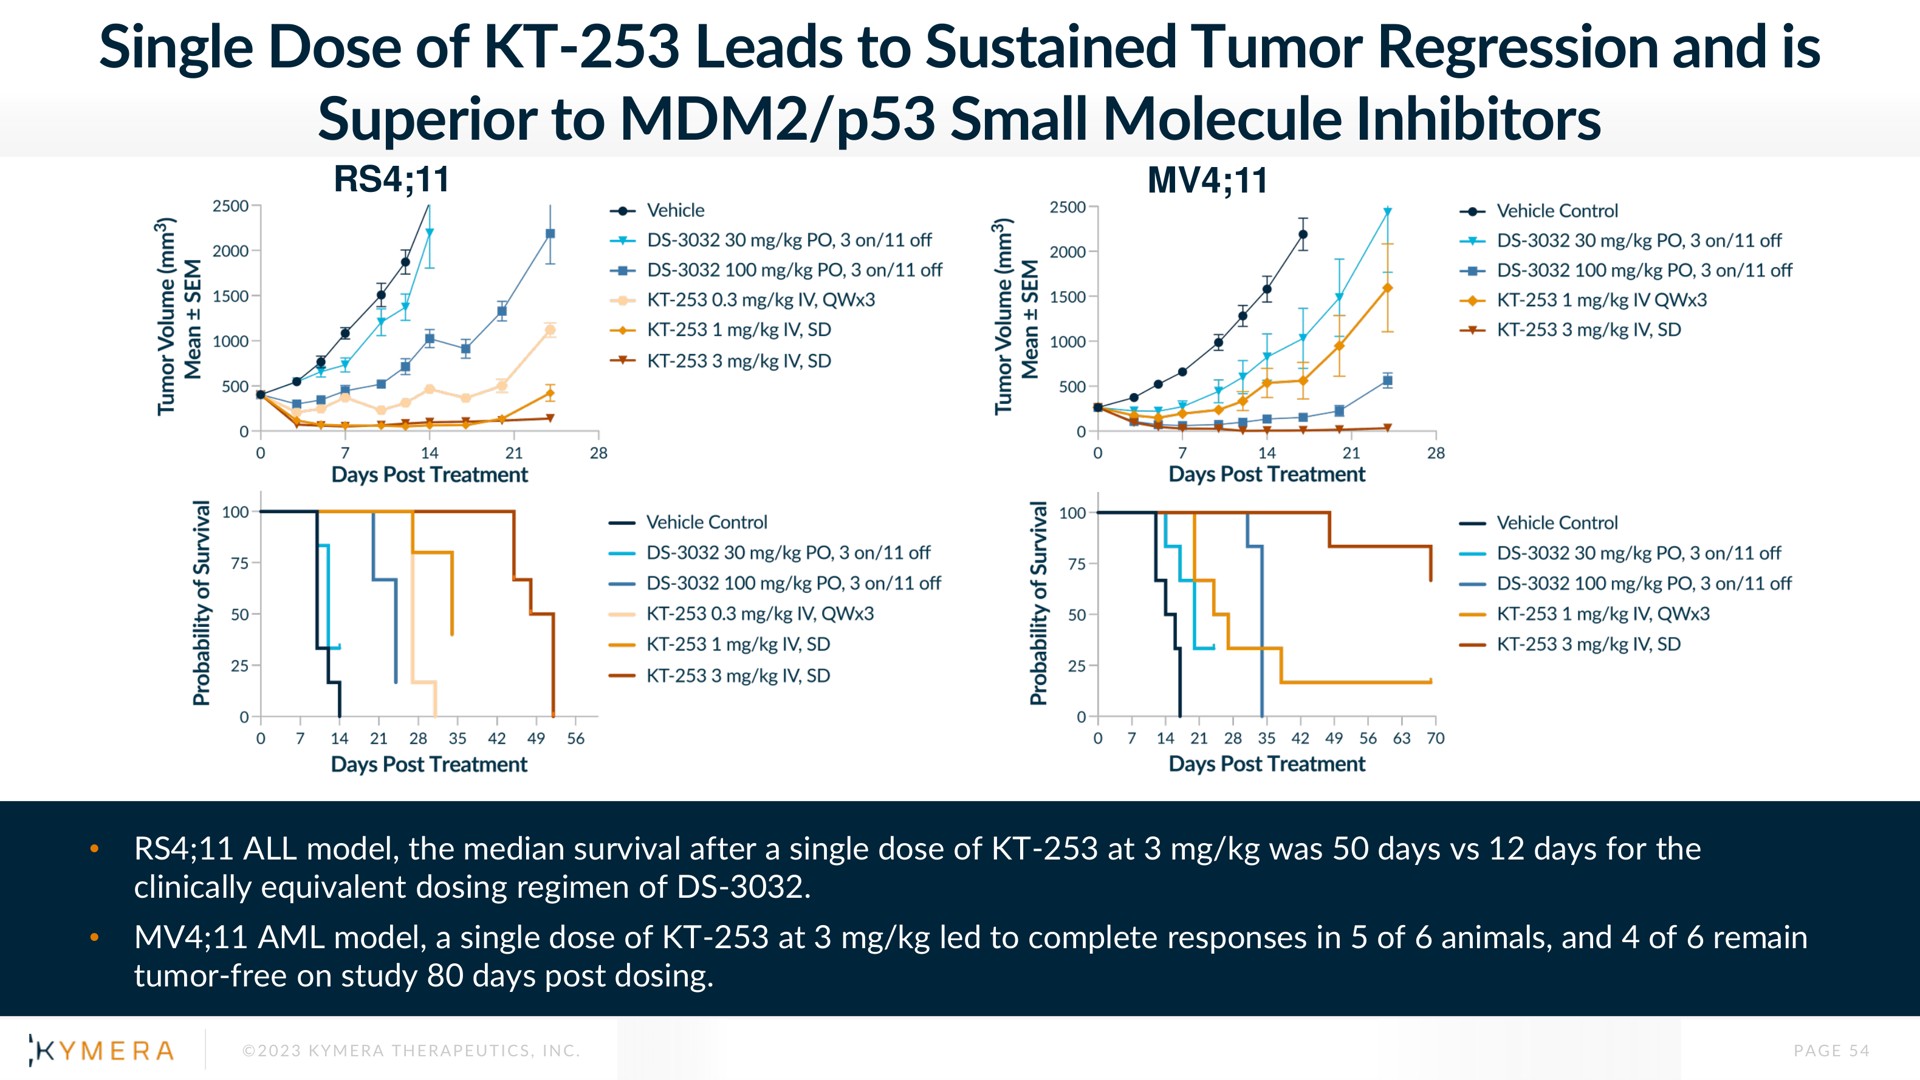 single dose of leads to sustained tumor regression and is superior to small molecule inhibitors | Kymera